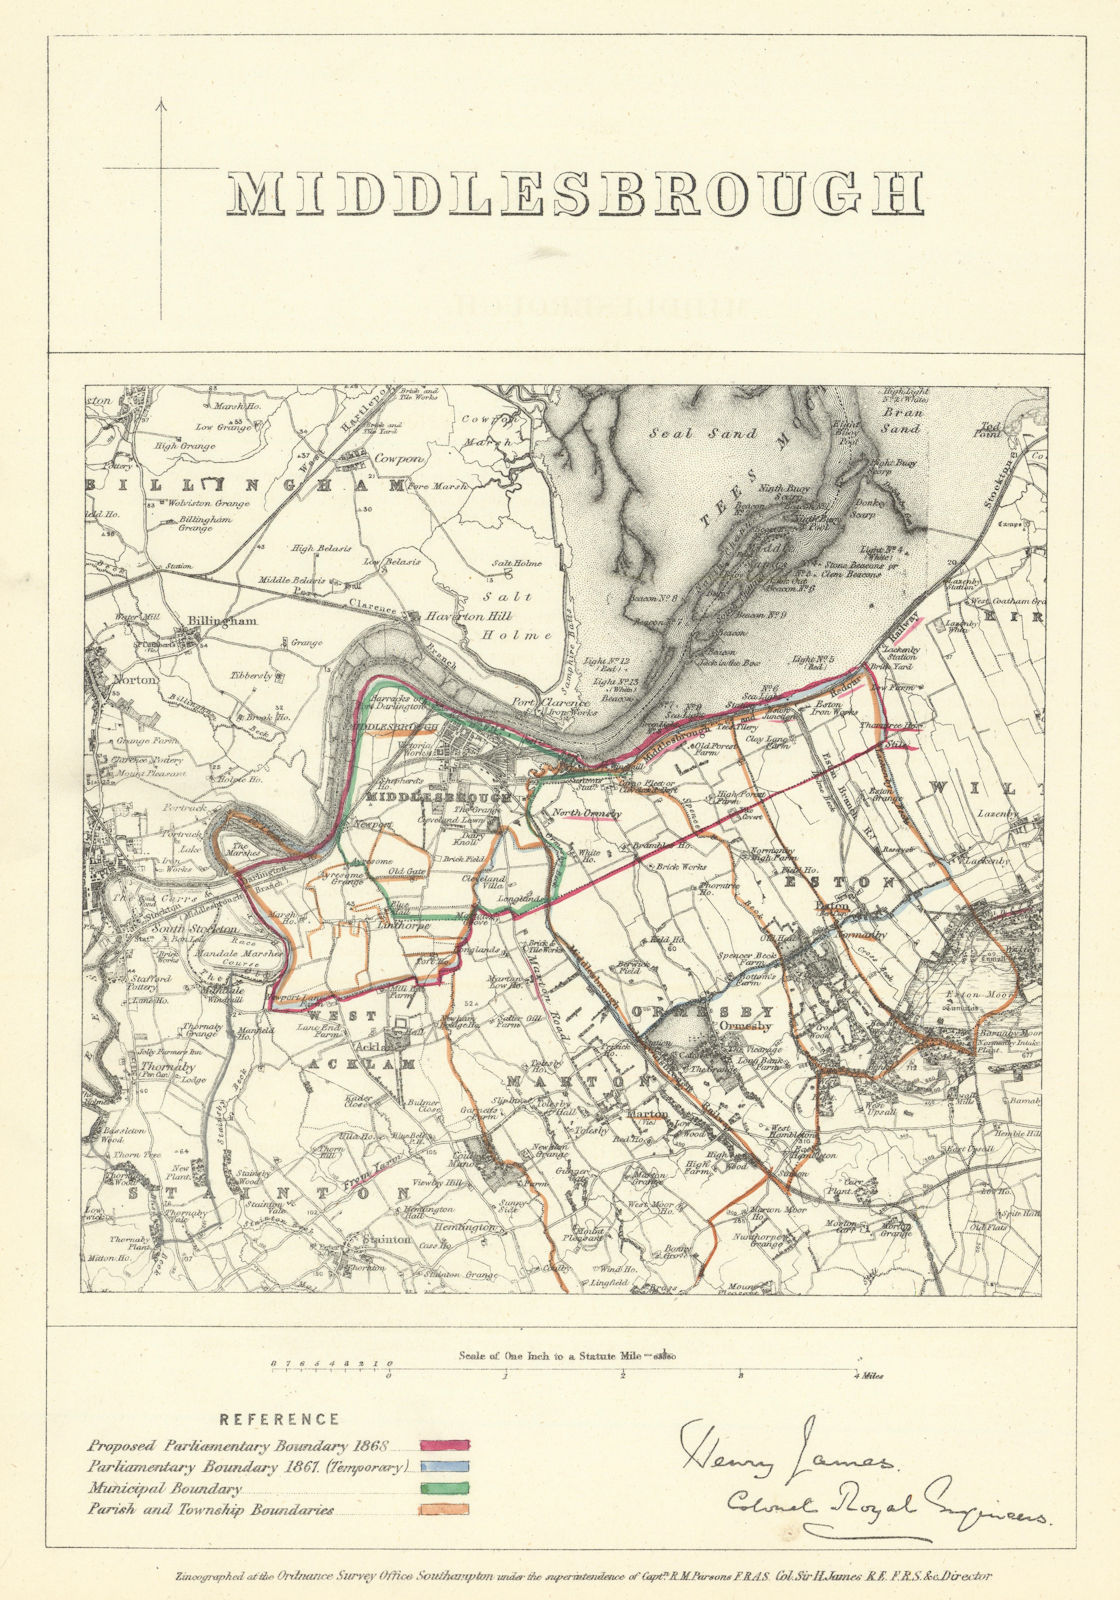 Middlesbrough, Yorkshire. JAMES. Parliamentary Boundary Commission 1868 map